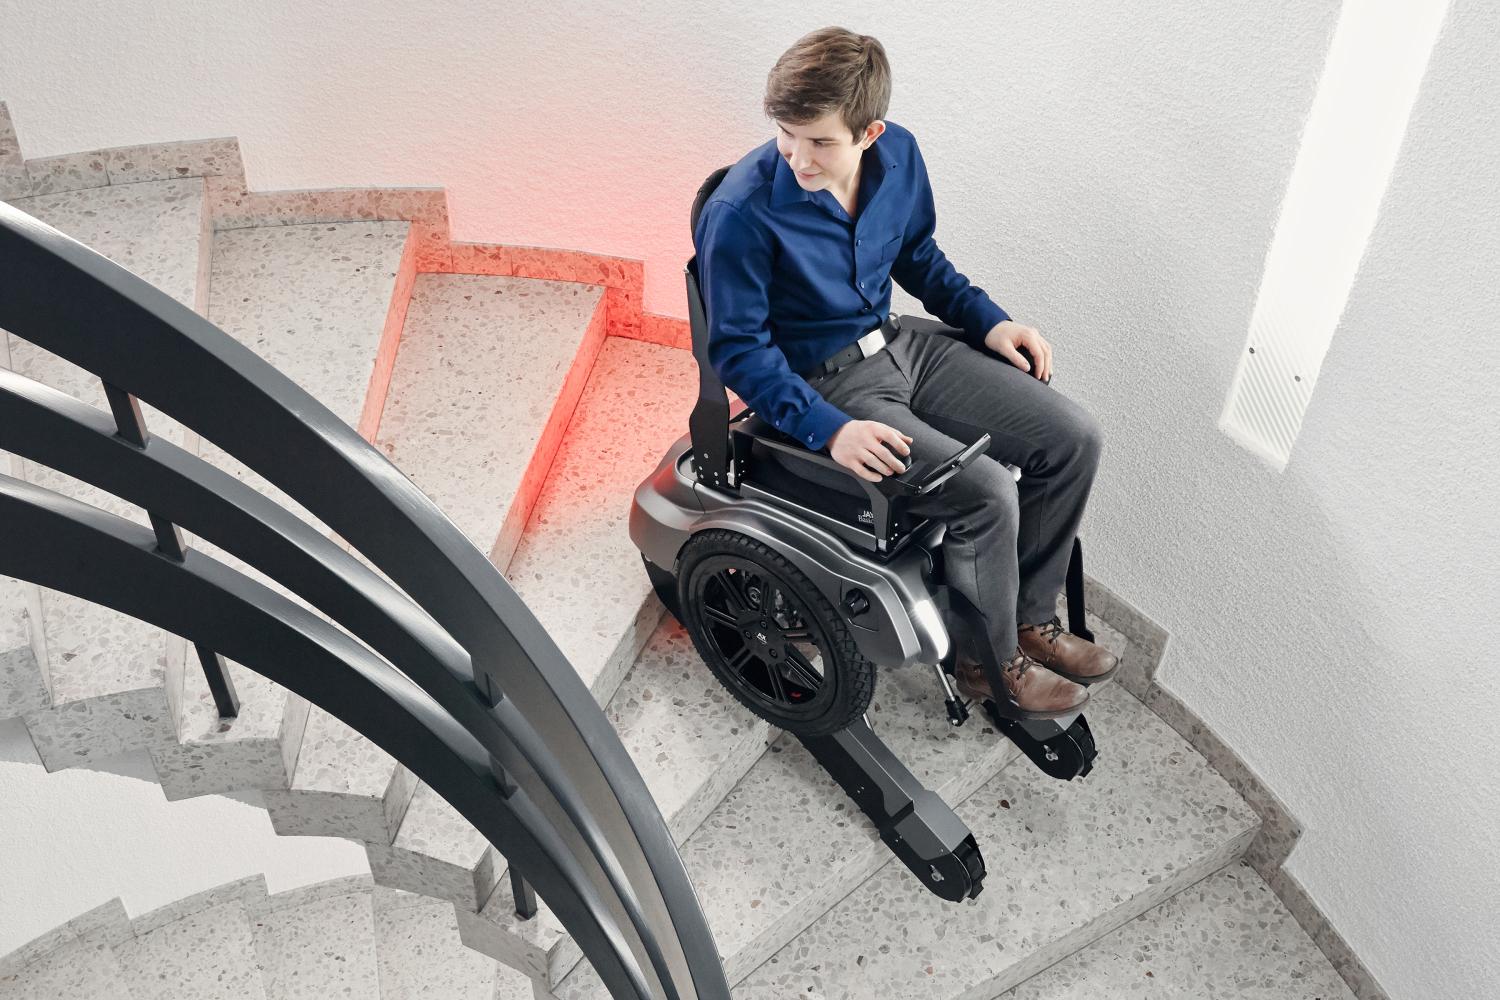 One wheelchair for all situations